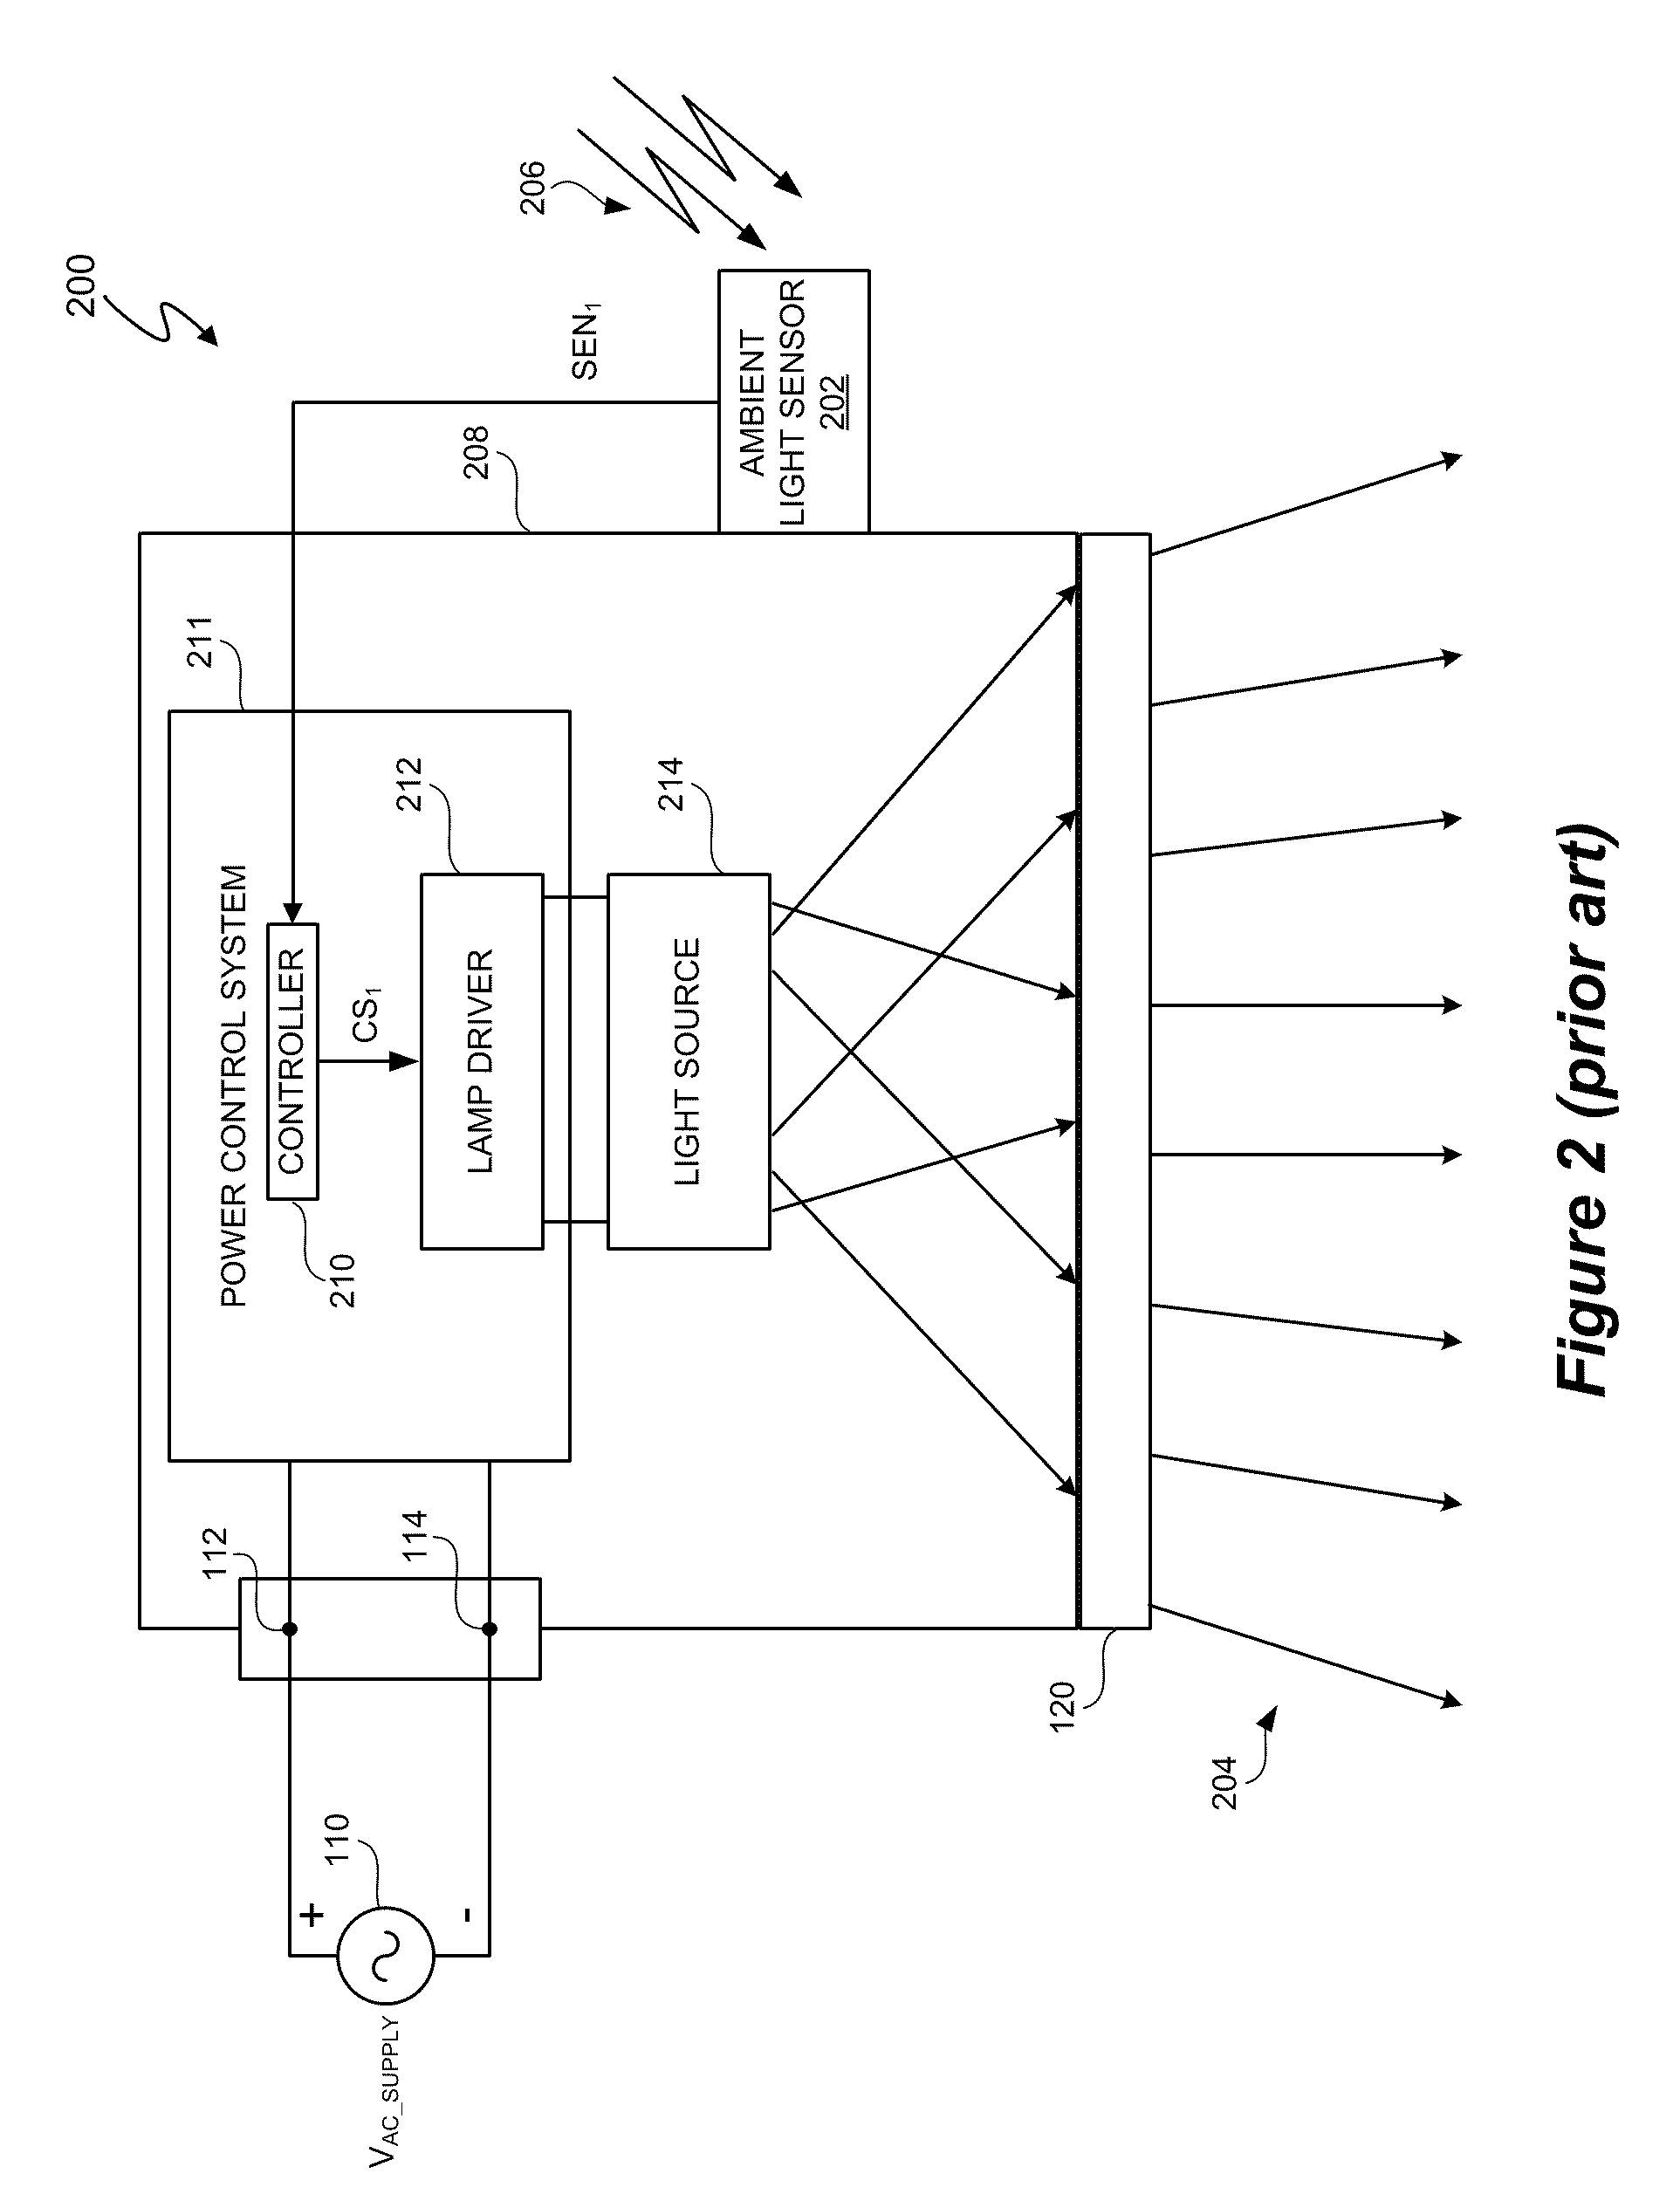 Time division light output sensing and brightness adjustment for different spectra of light emitting diodes